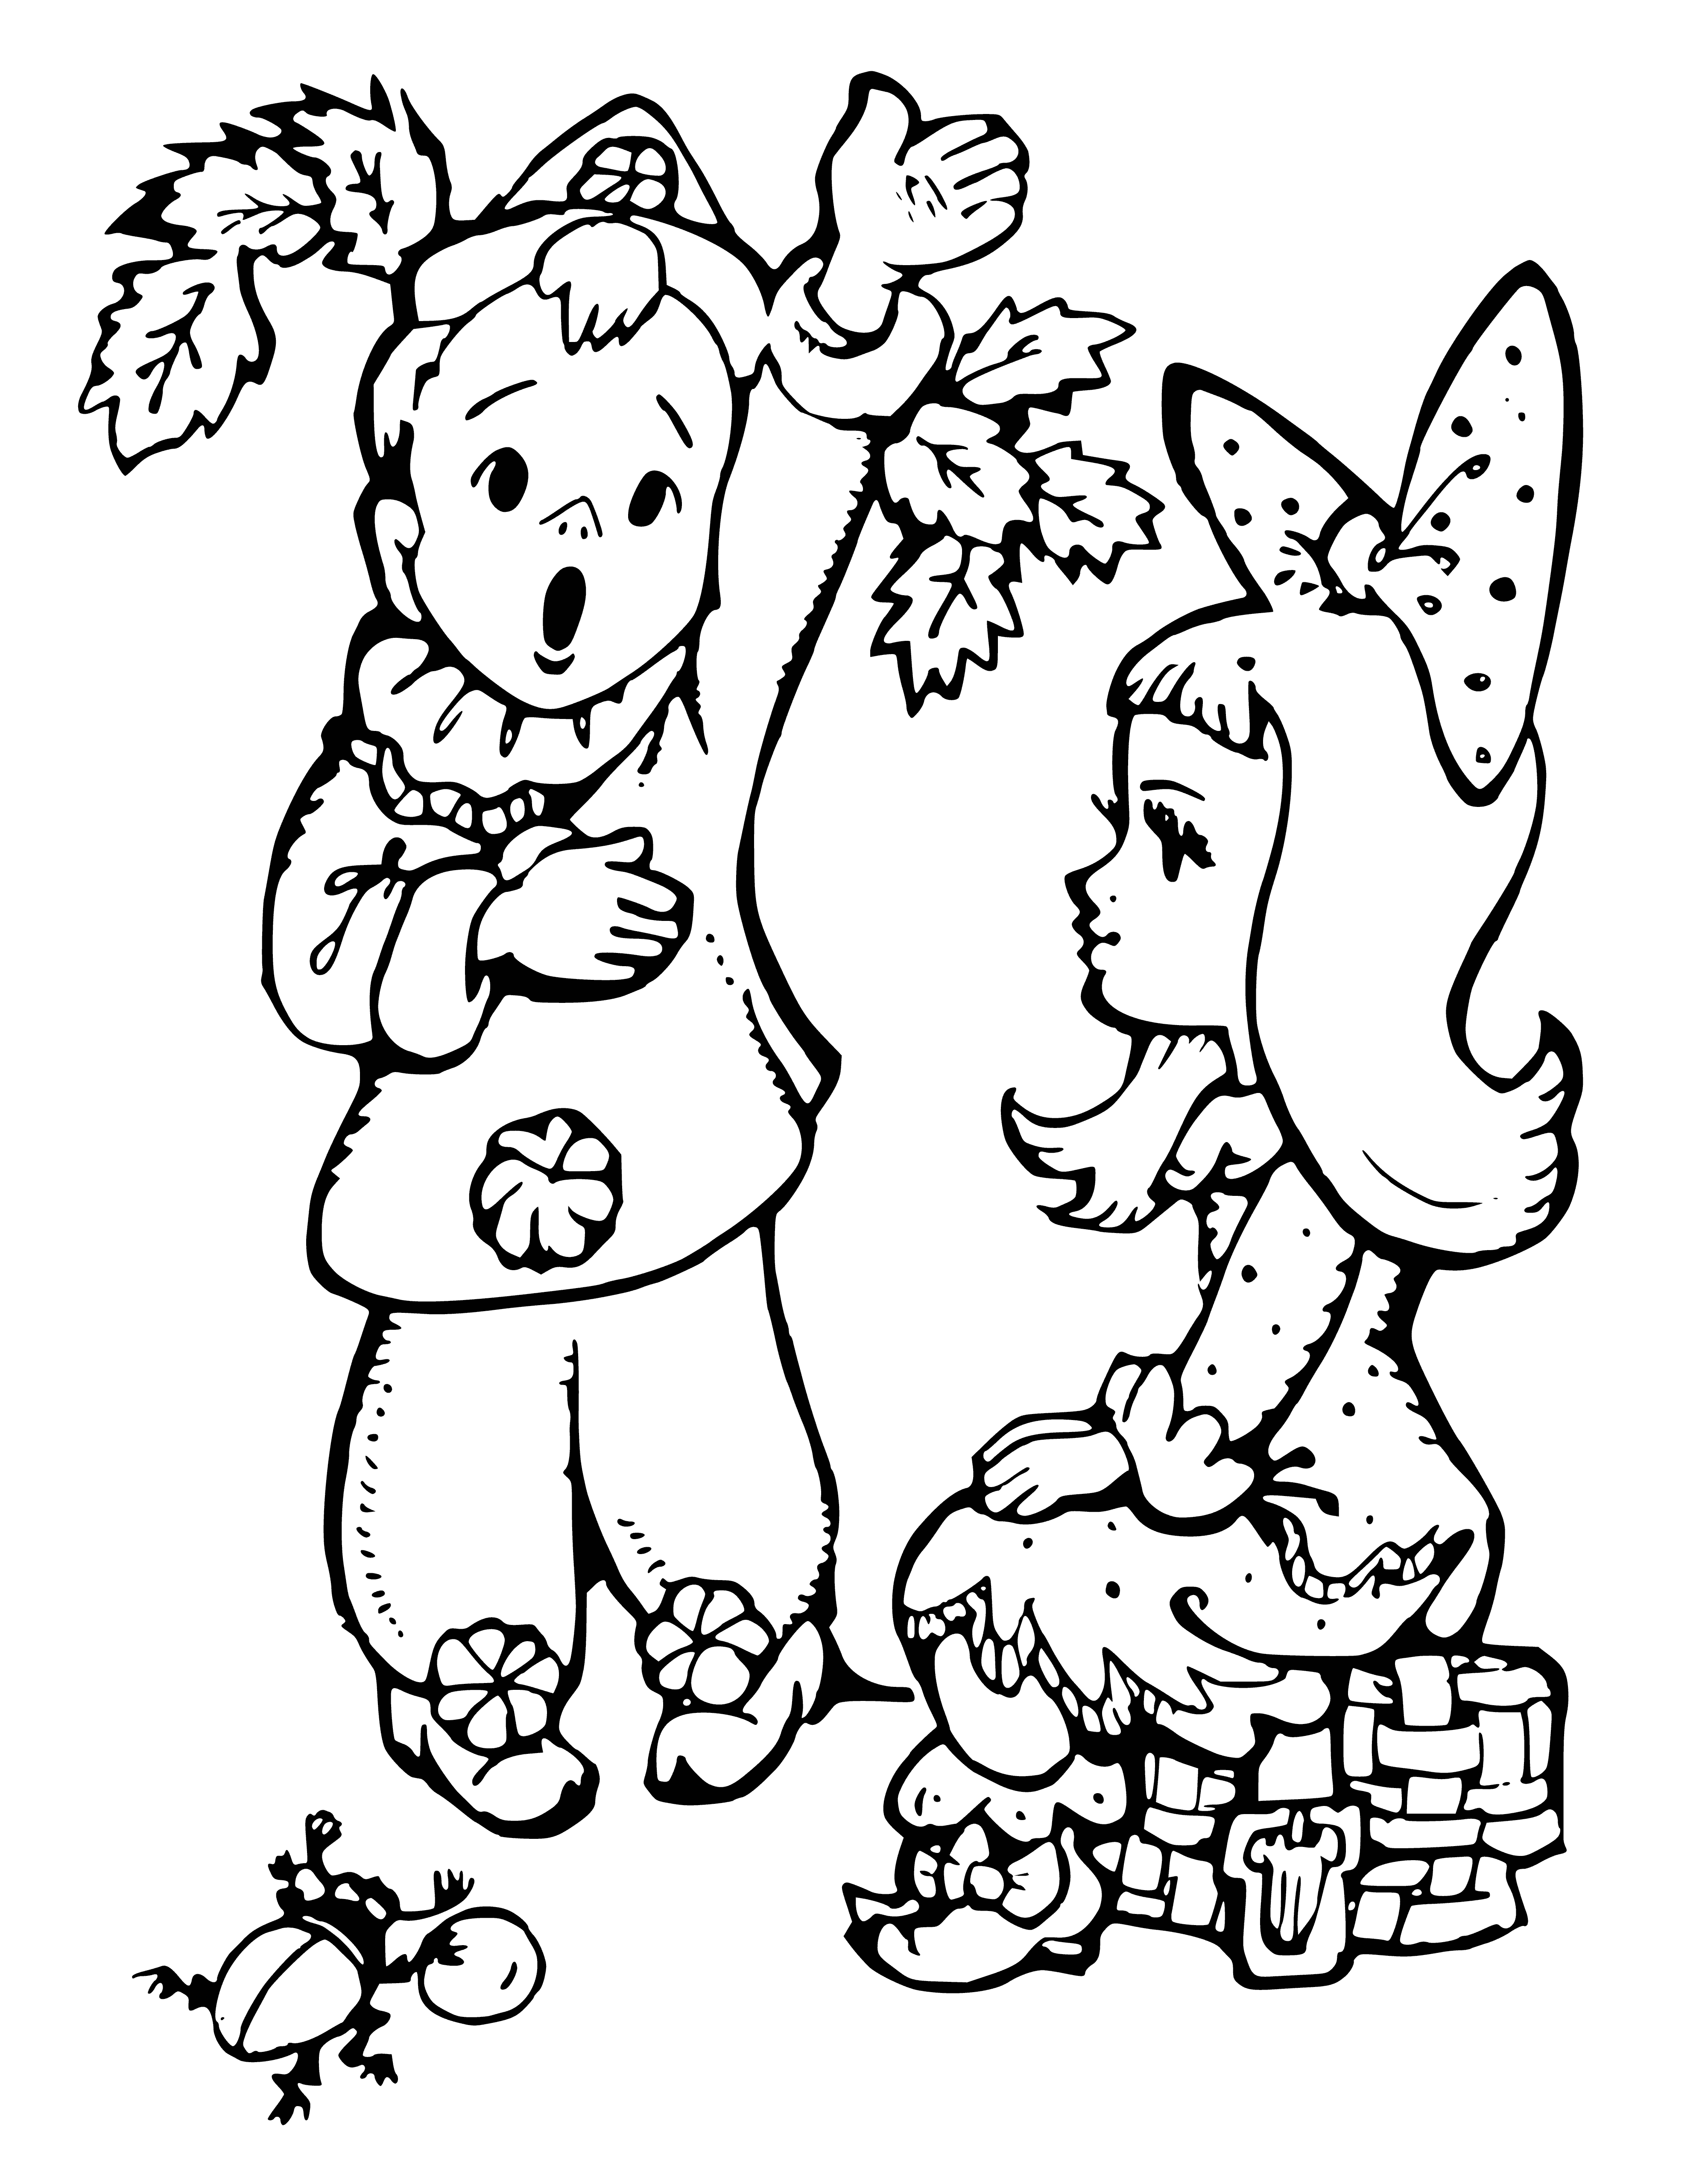 Pierrot and Malvina coloring page